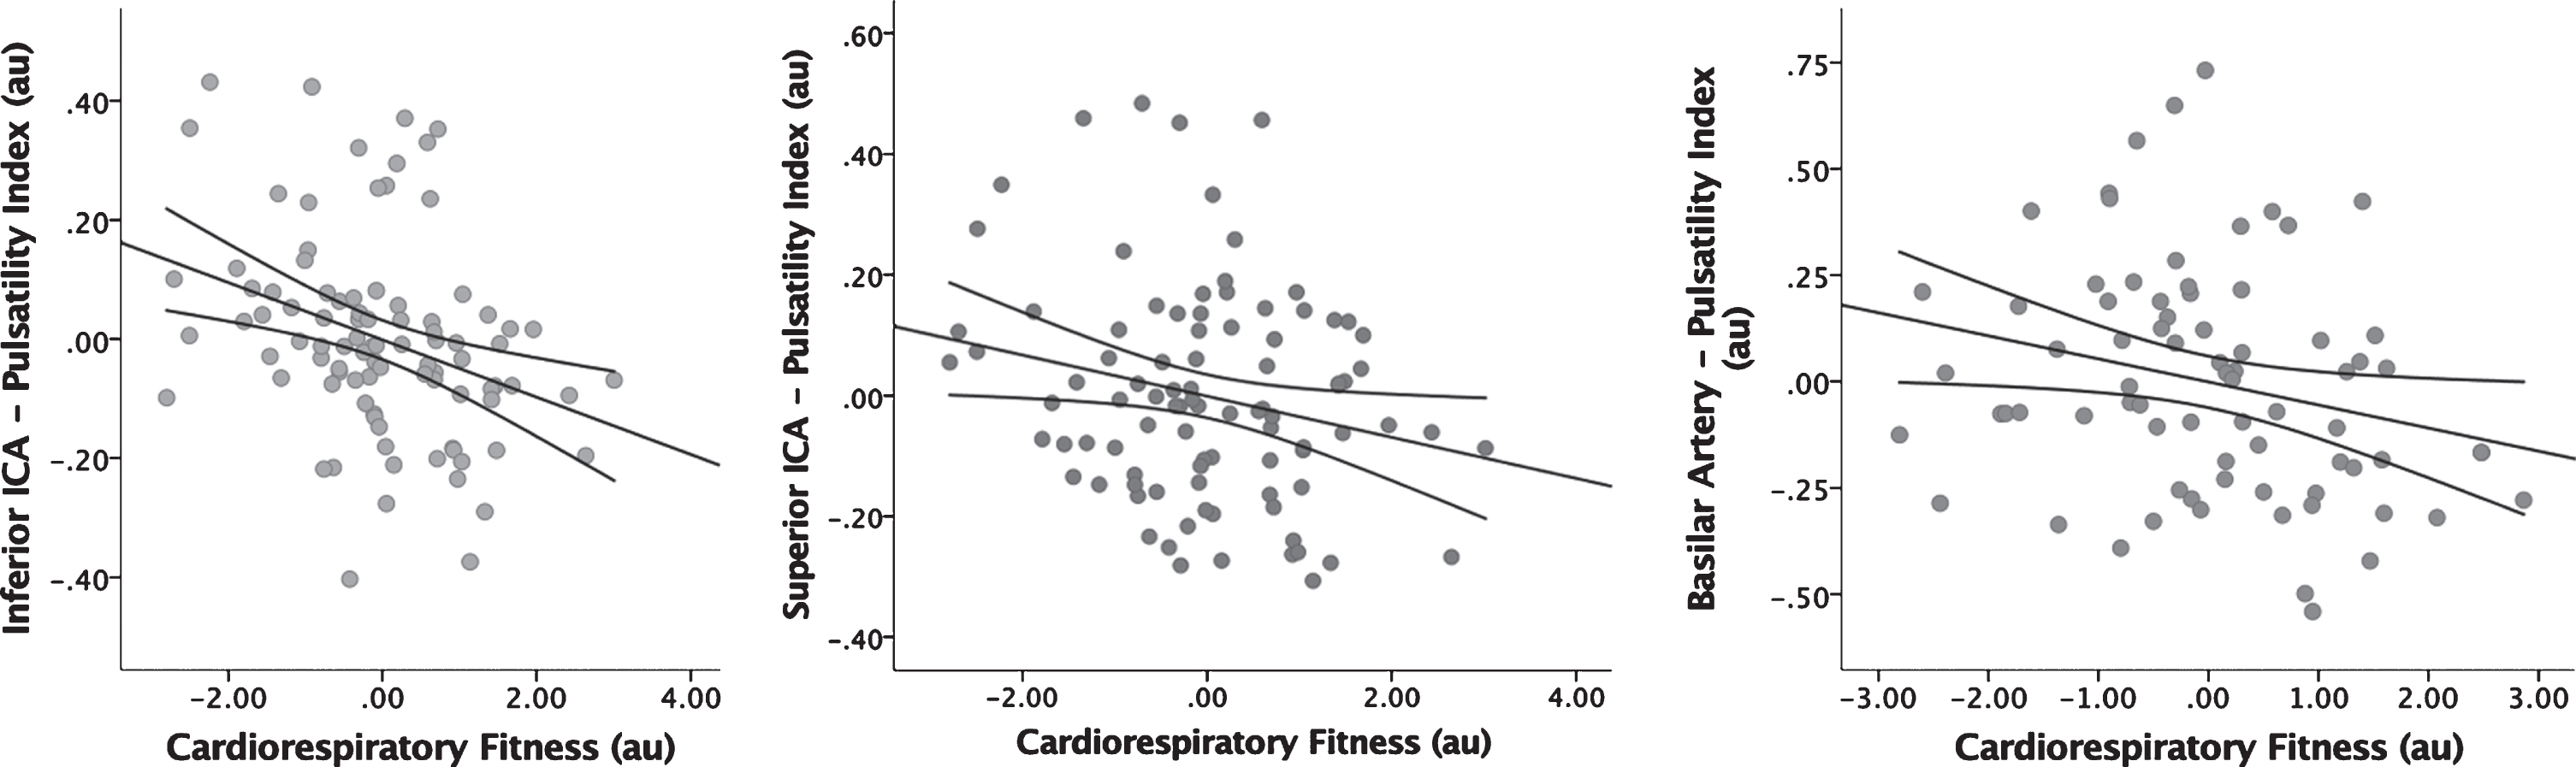 Regression Analysis of CRF vs Pulsatility Index. Displays the inverse association between CRF and PI in the inferior ICA (A), superior ICA (B), and basilar artery (C). Age, gender, APOE4, and ASCVD risk scores have been factored into these figures. CRF = cardiorespiratory fitness, PI = pulsatility index, ICA = internal carotid artery, APOE4 = apolipoprotein E4, ASCVD = atherosclerotic cardiovascular disease.